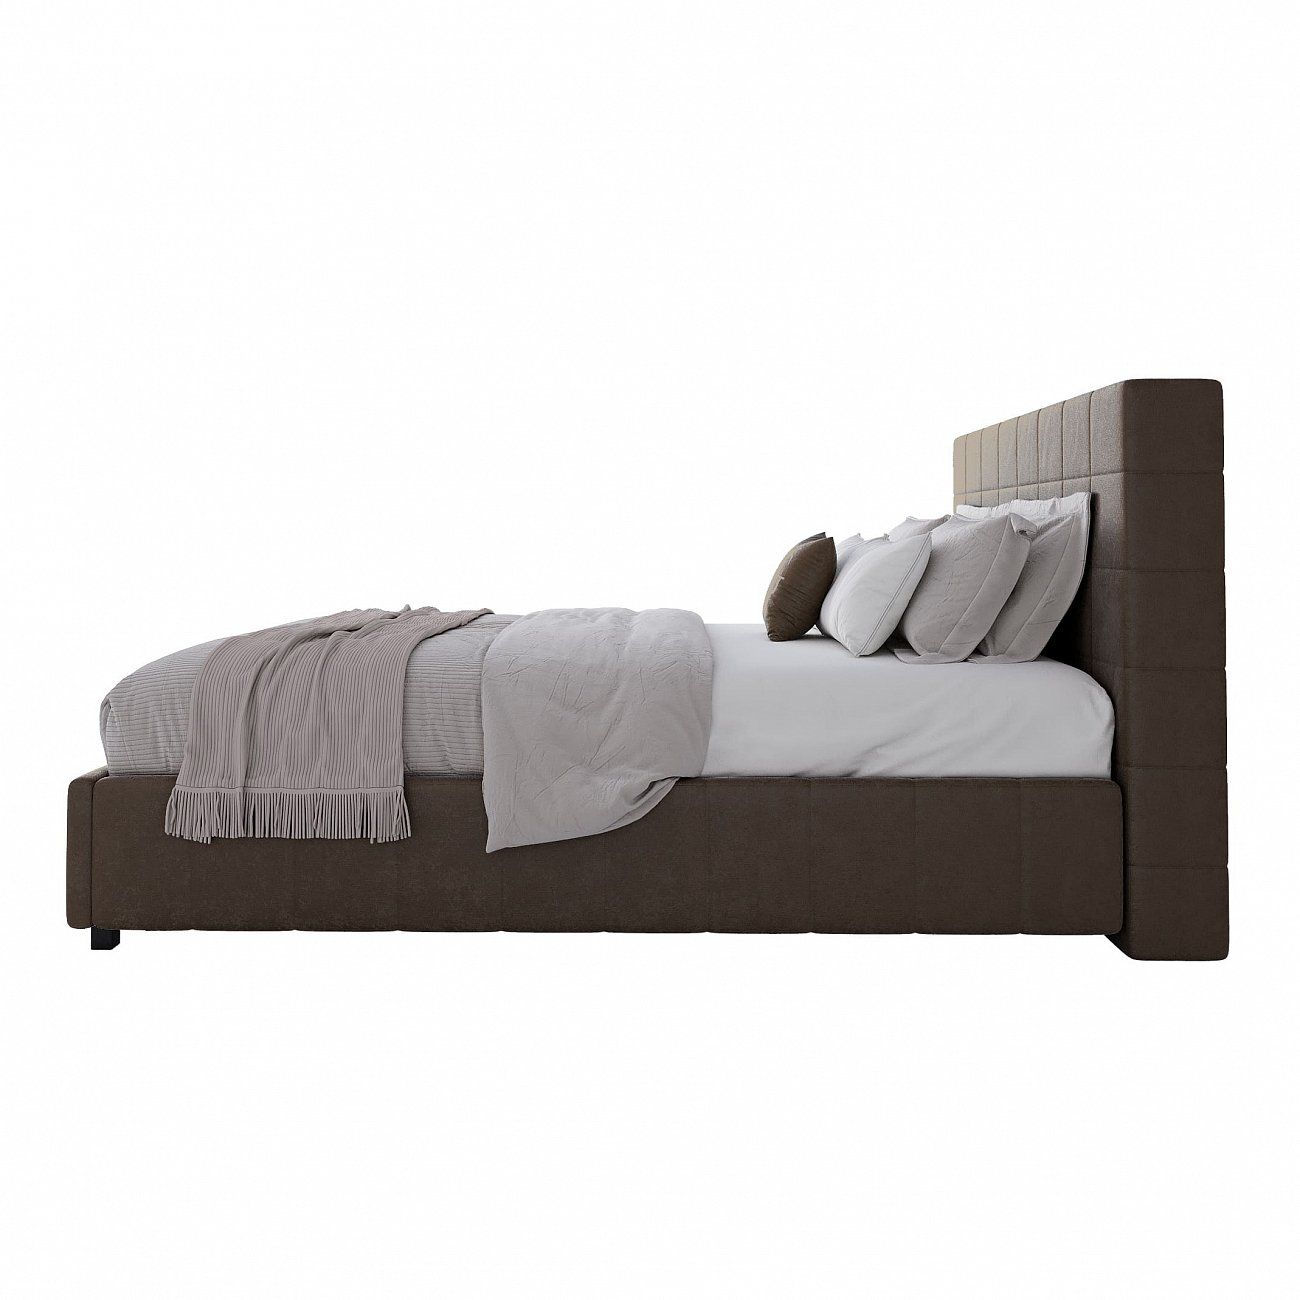 Double bed 160x200 brown Shining Modern